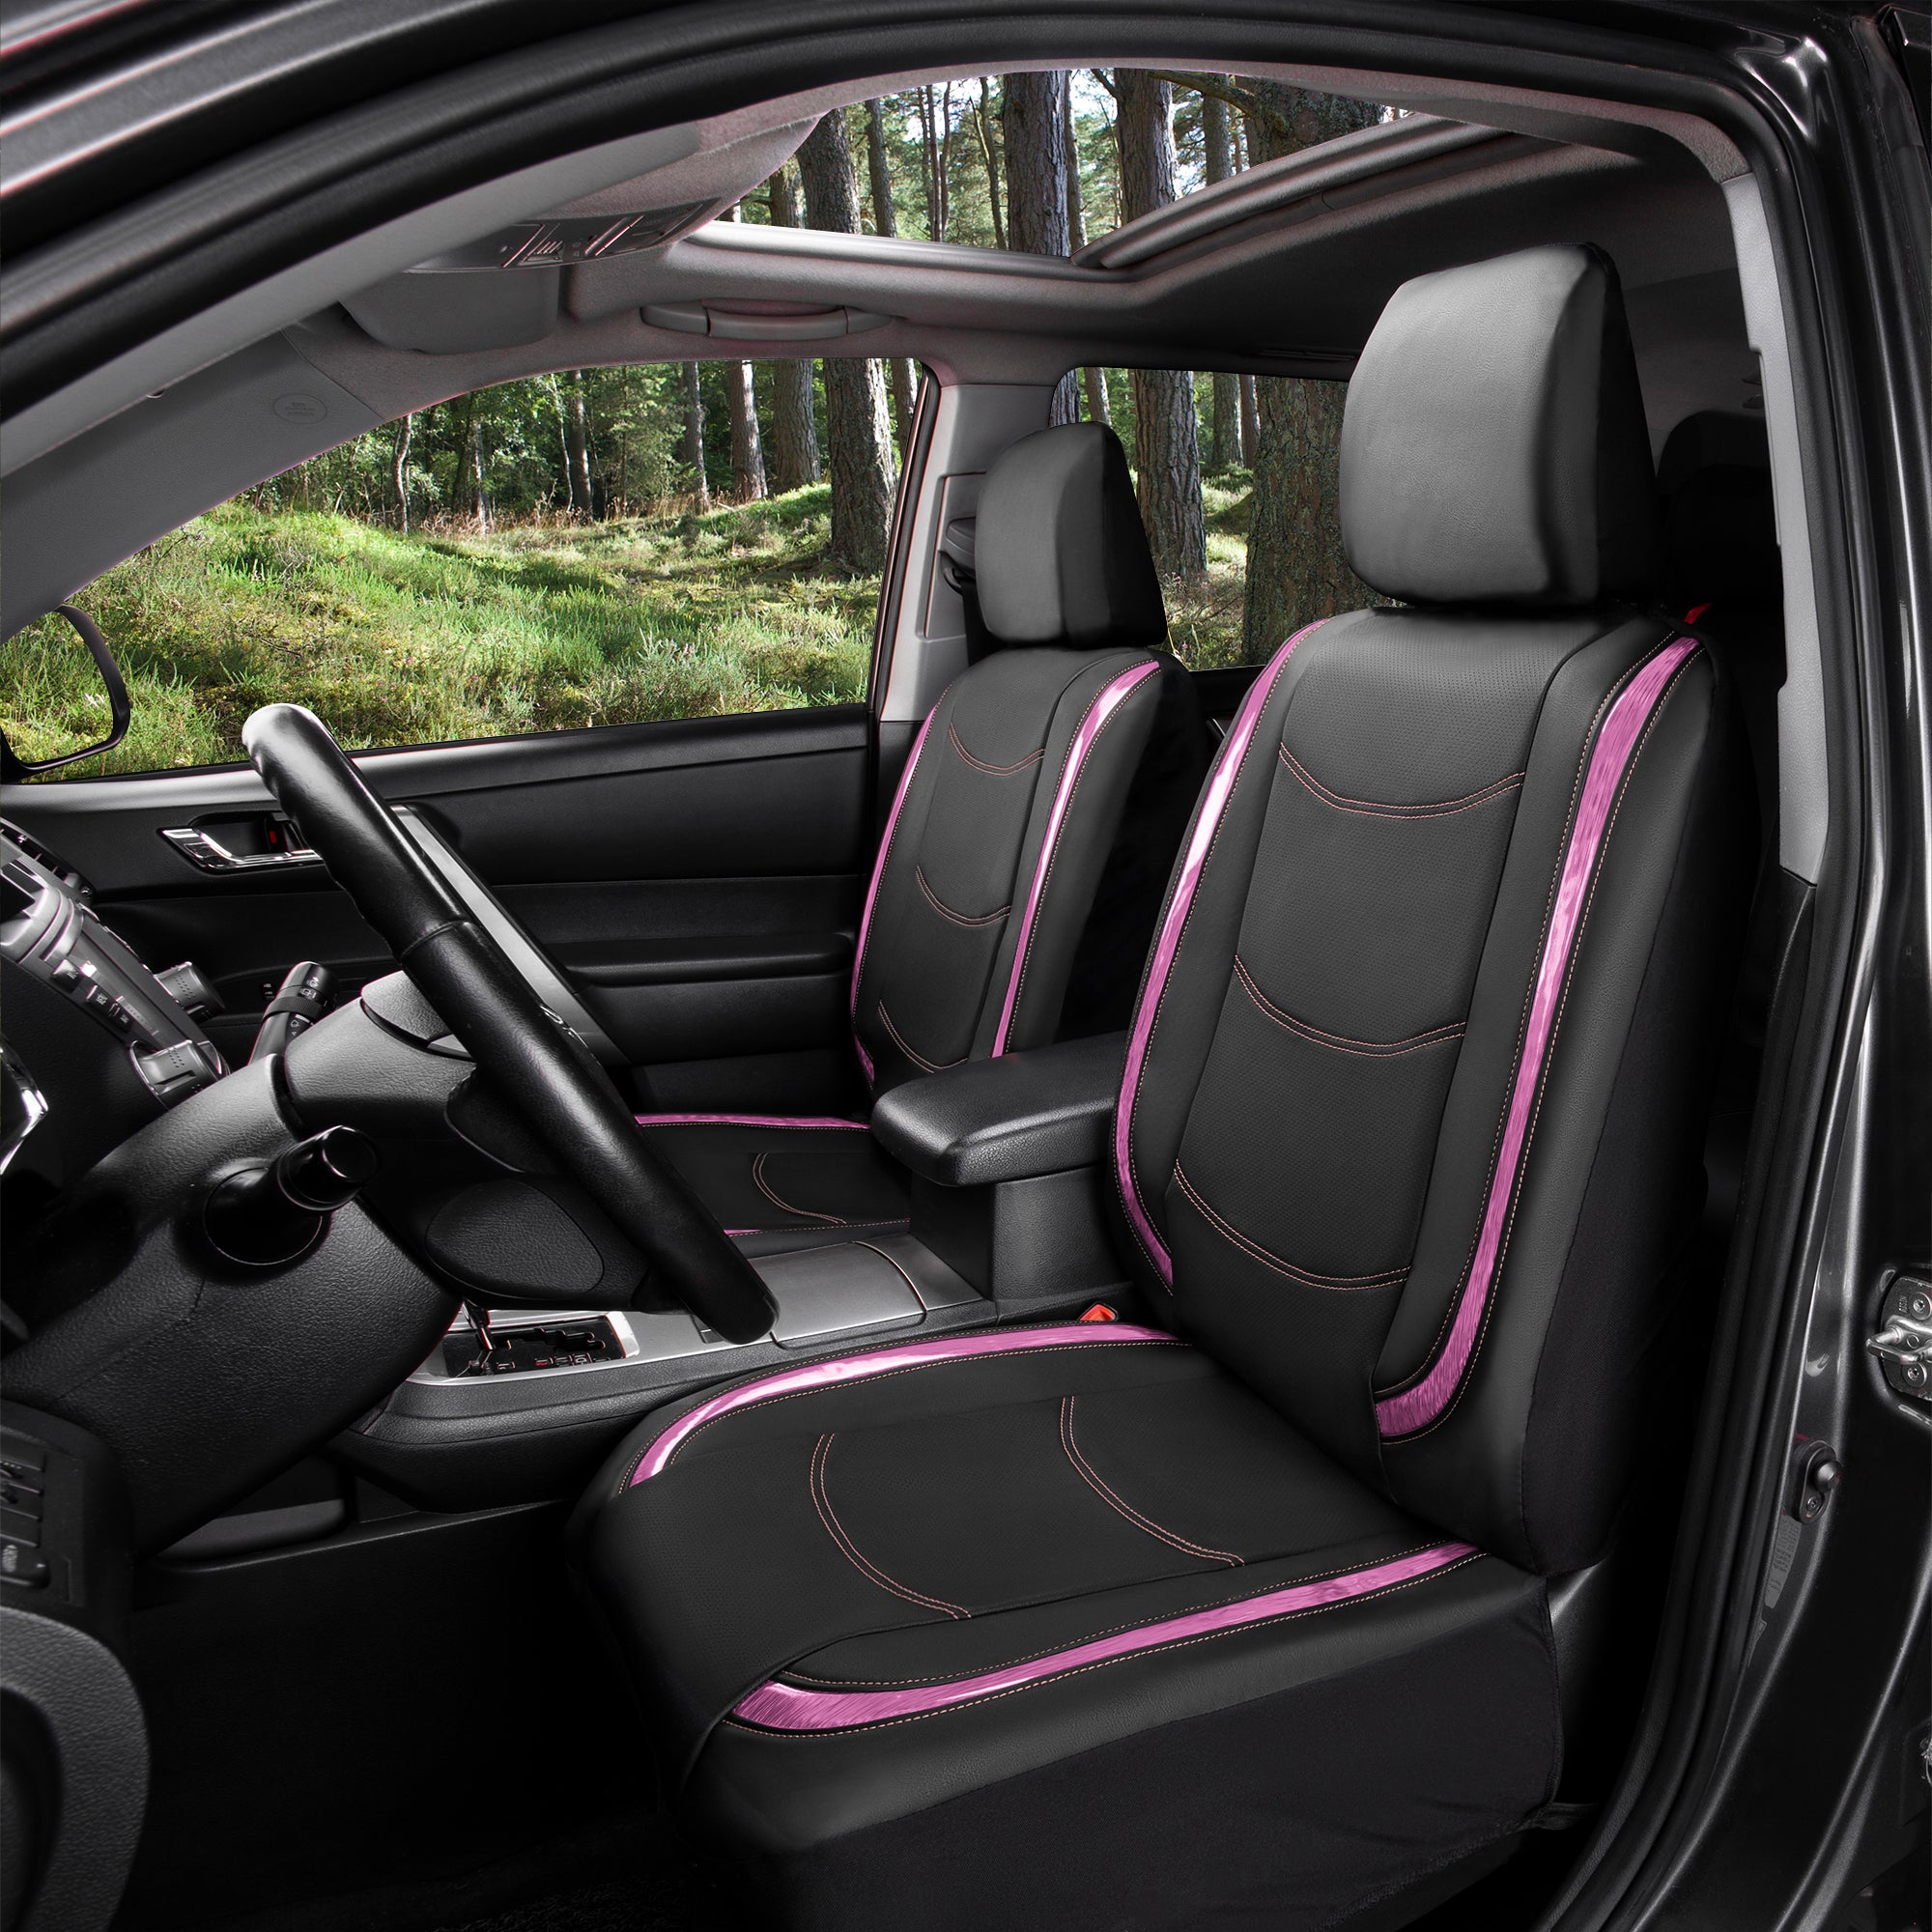 Galaxy13 Metallic Striped Deluxe Leatherette Seat Covers - Full Set Pink